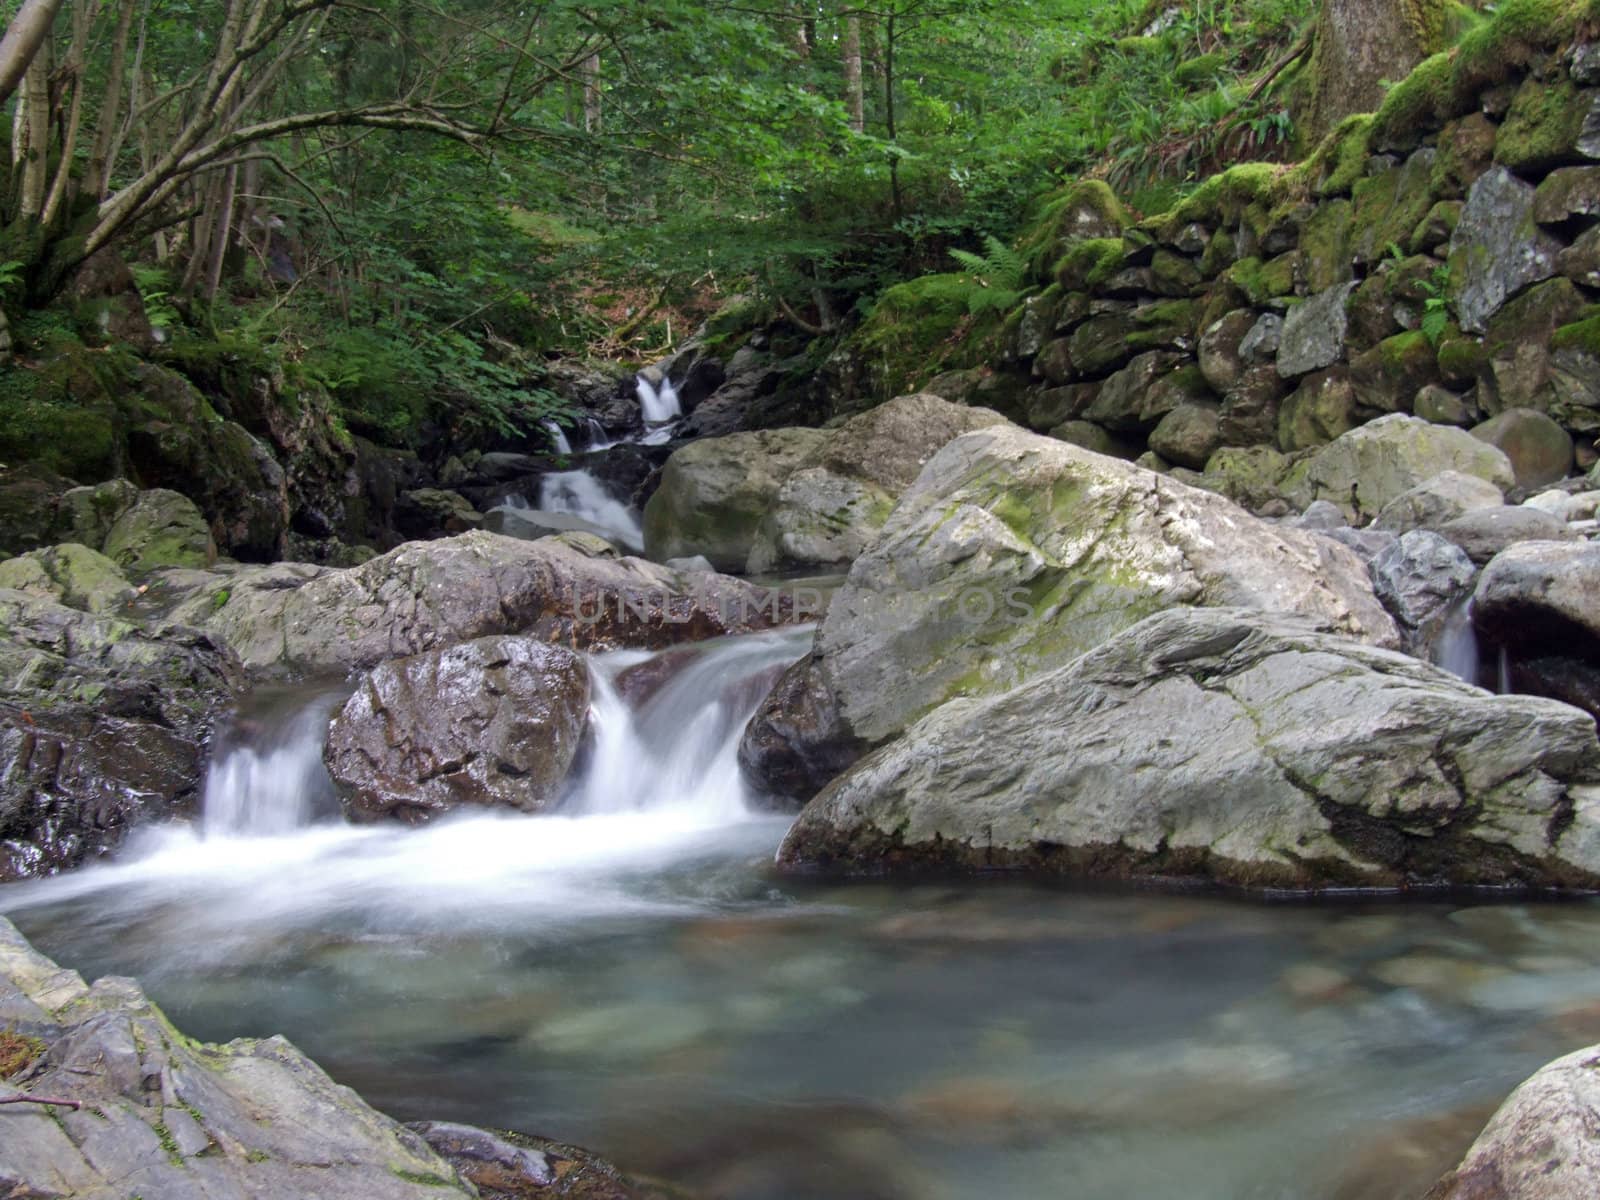 water cascading over rocks and boulders into a clear pool lined with pebbles ferns and trees